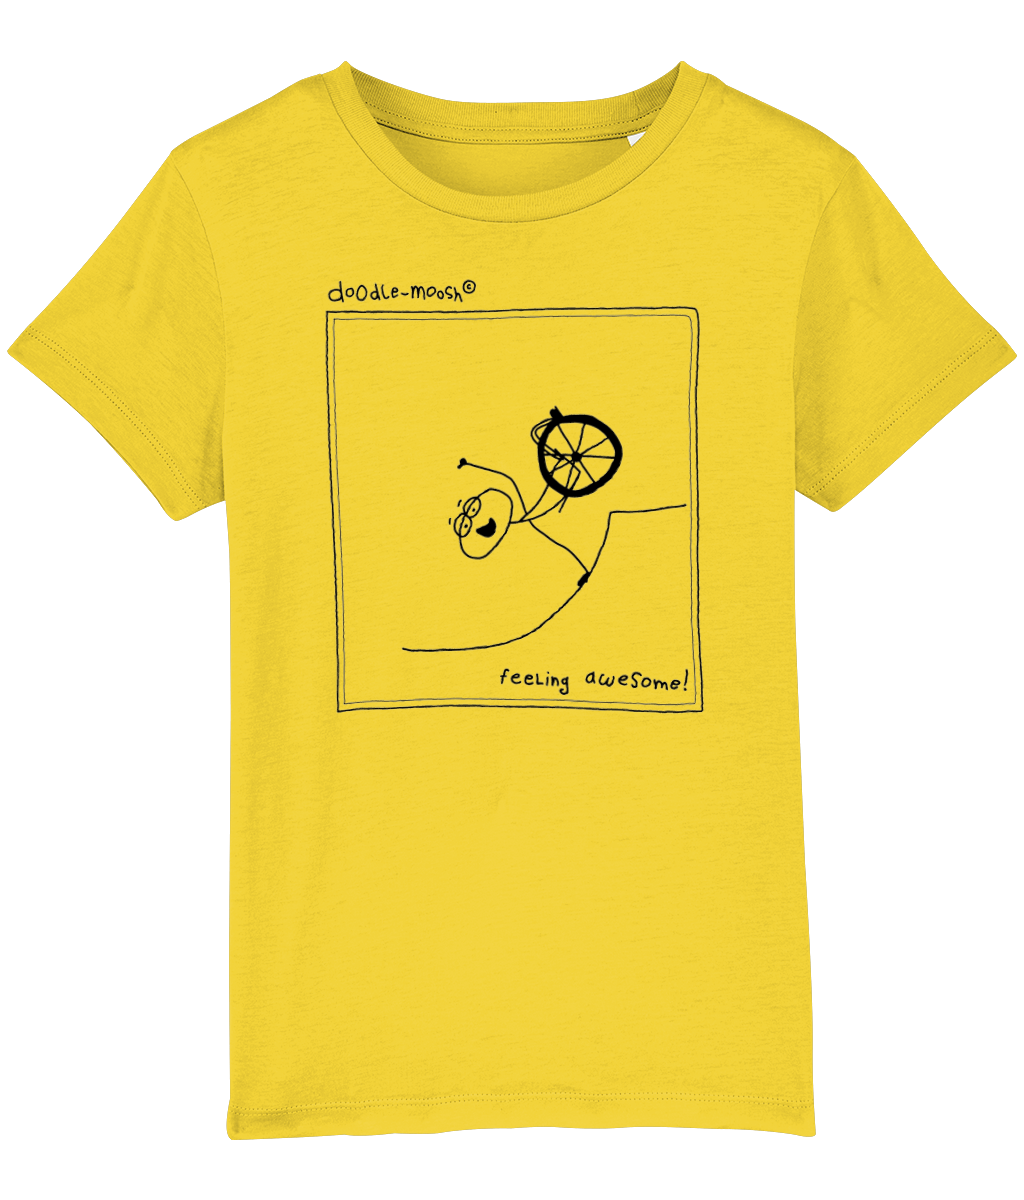 feeling awesome t-shirt, yellow with black 